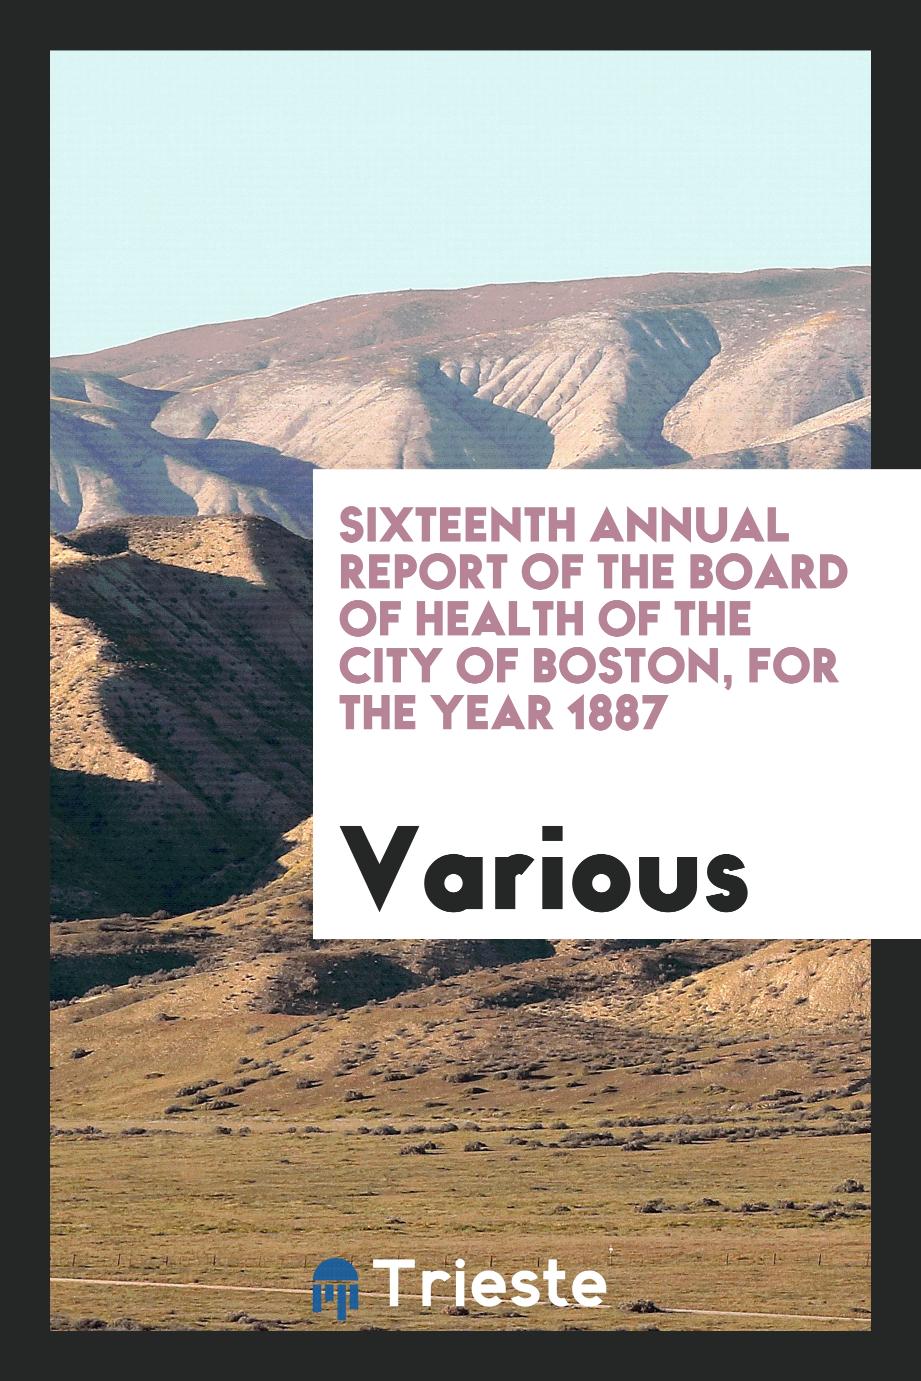 Sixteenth Annual Report of the board of health of the city of Boston, For the Year 1887